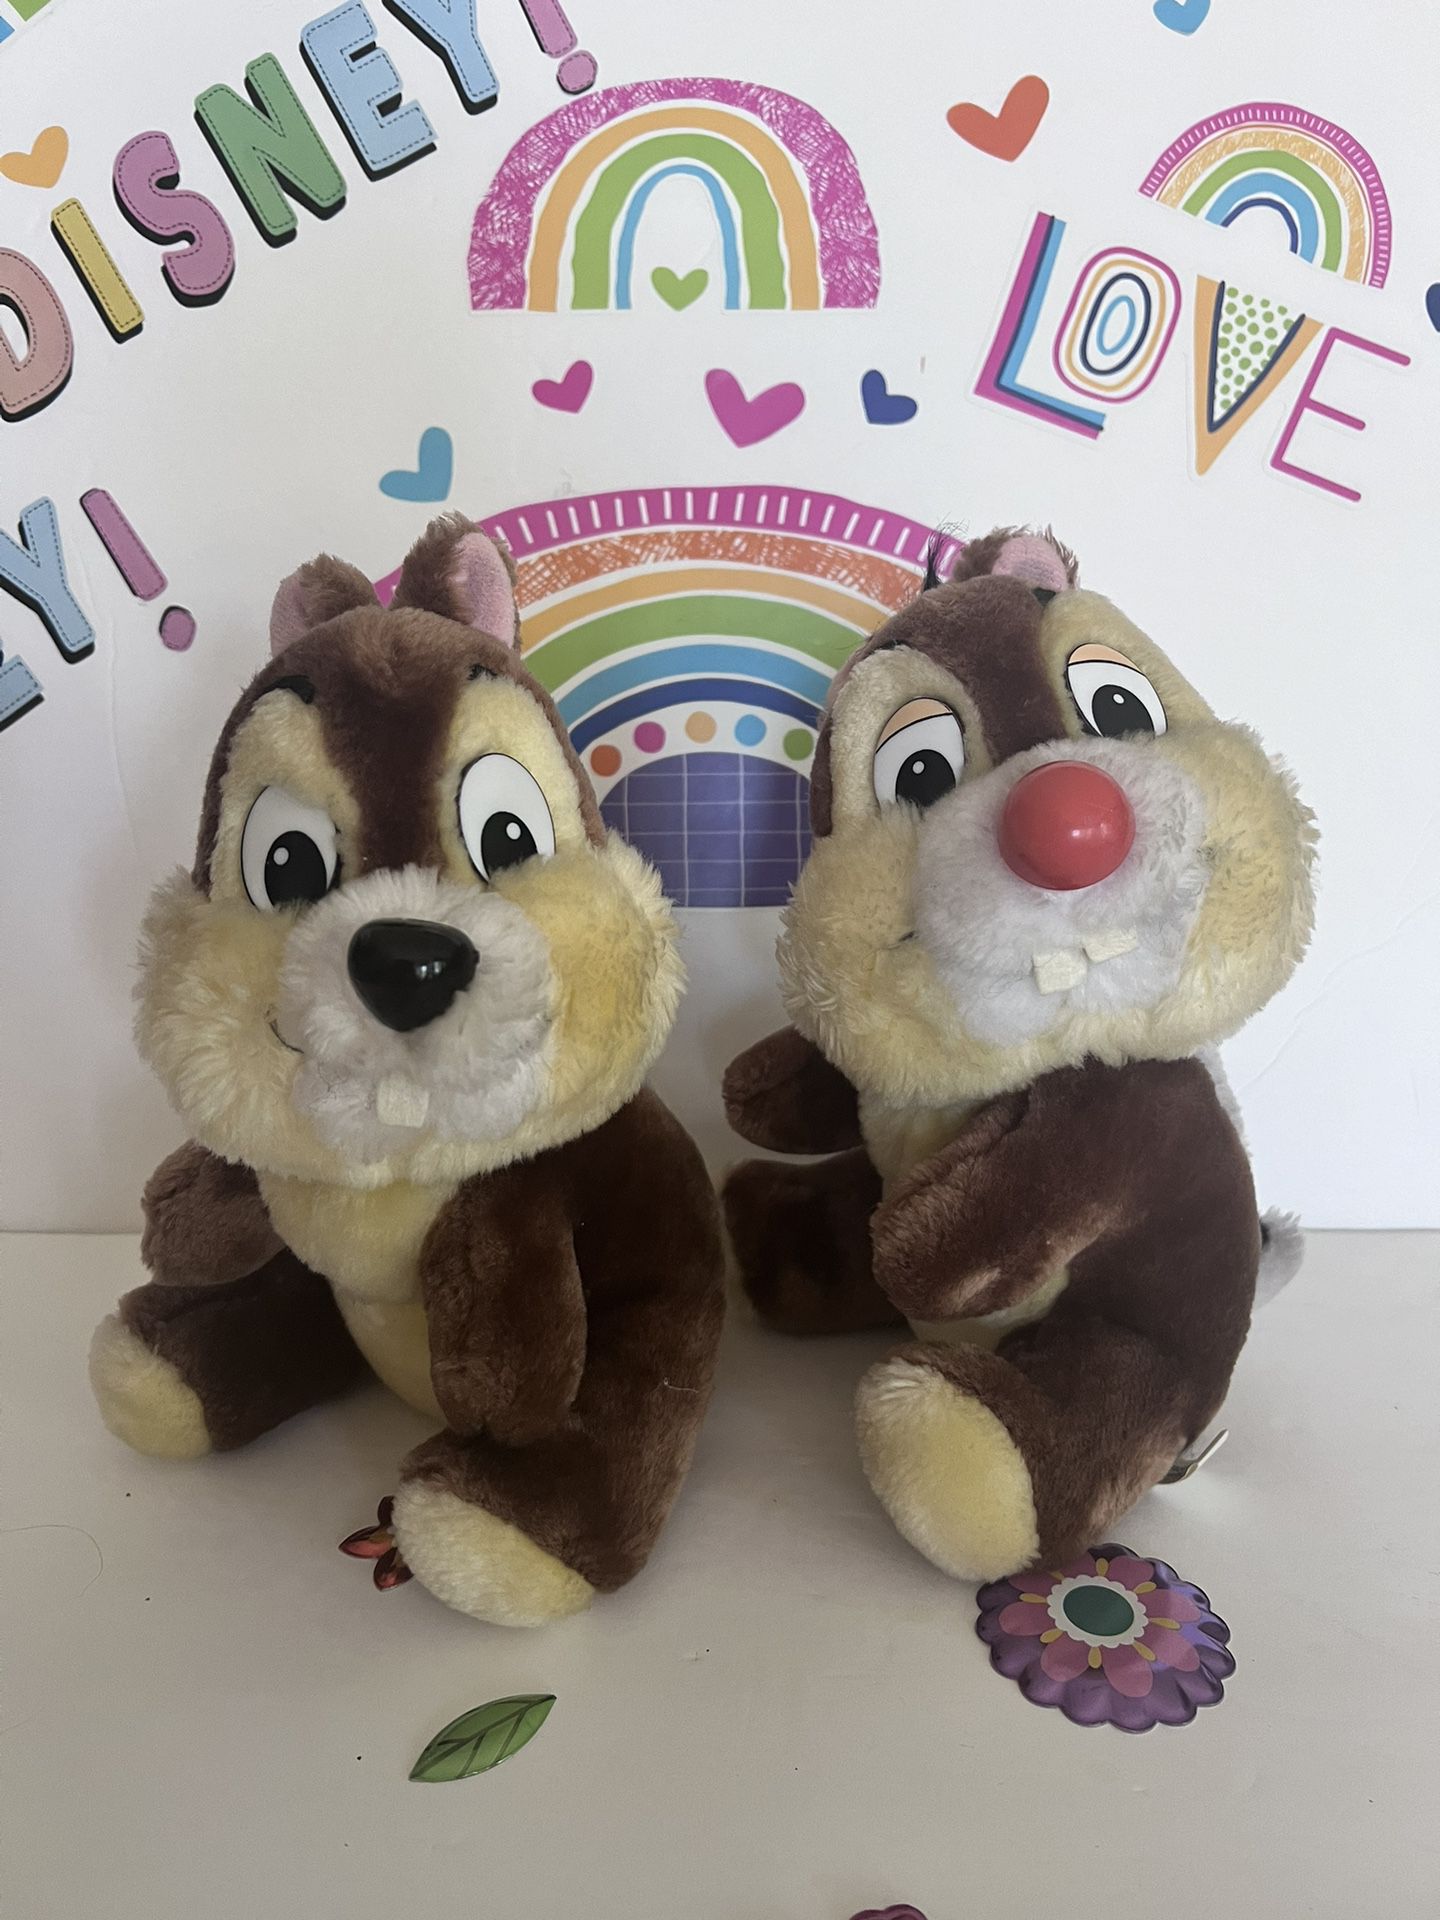 DISNEY  CHIP N DALE 9 INCH SITTING SOFT PLUSH WITH HARD NOSE & Plastic Eyes - FROM DISNEY WORLD!  VINTAGE